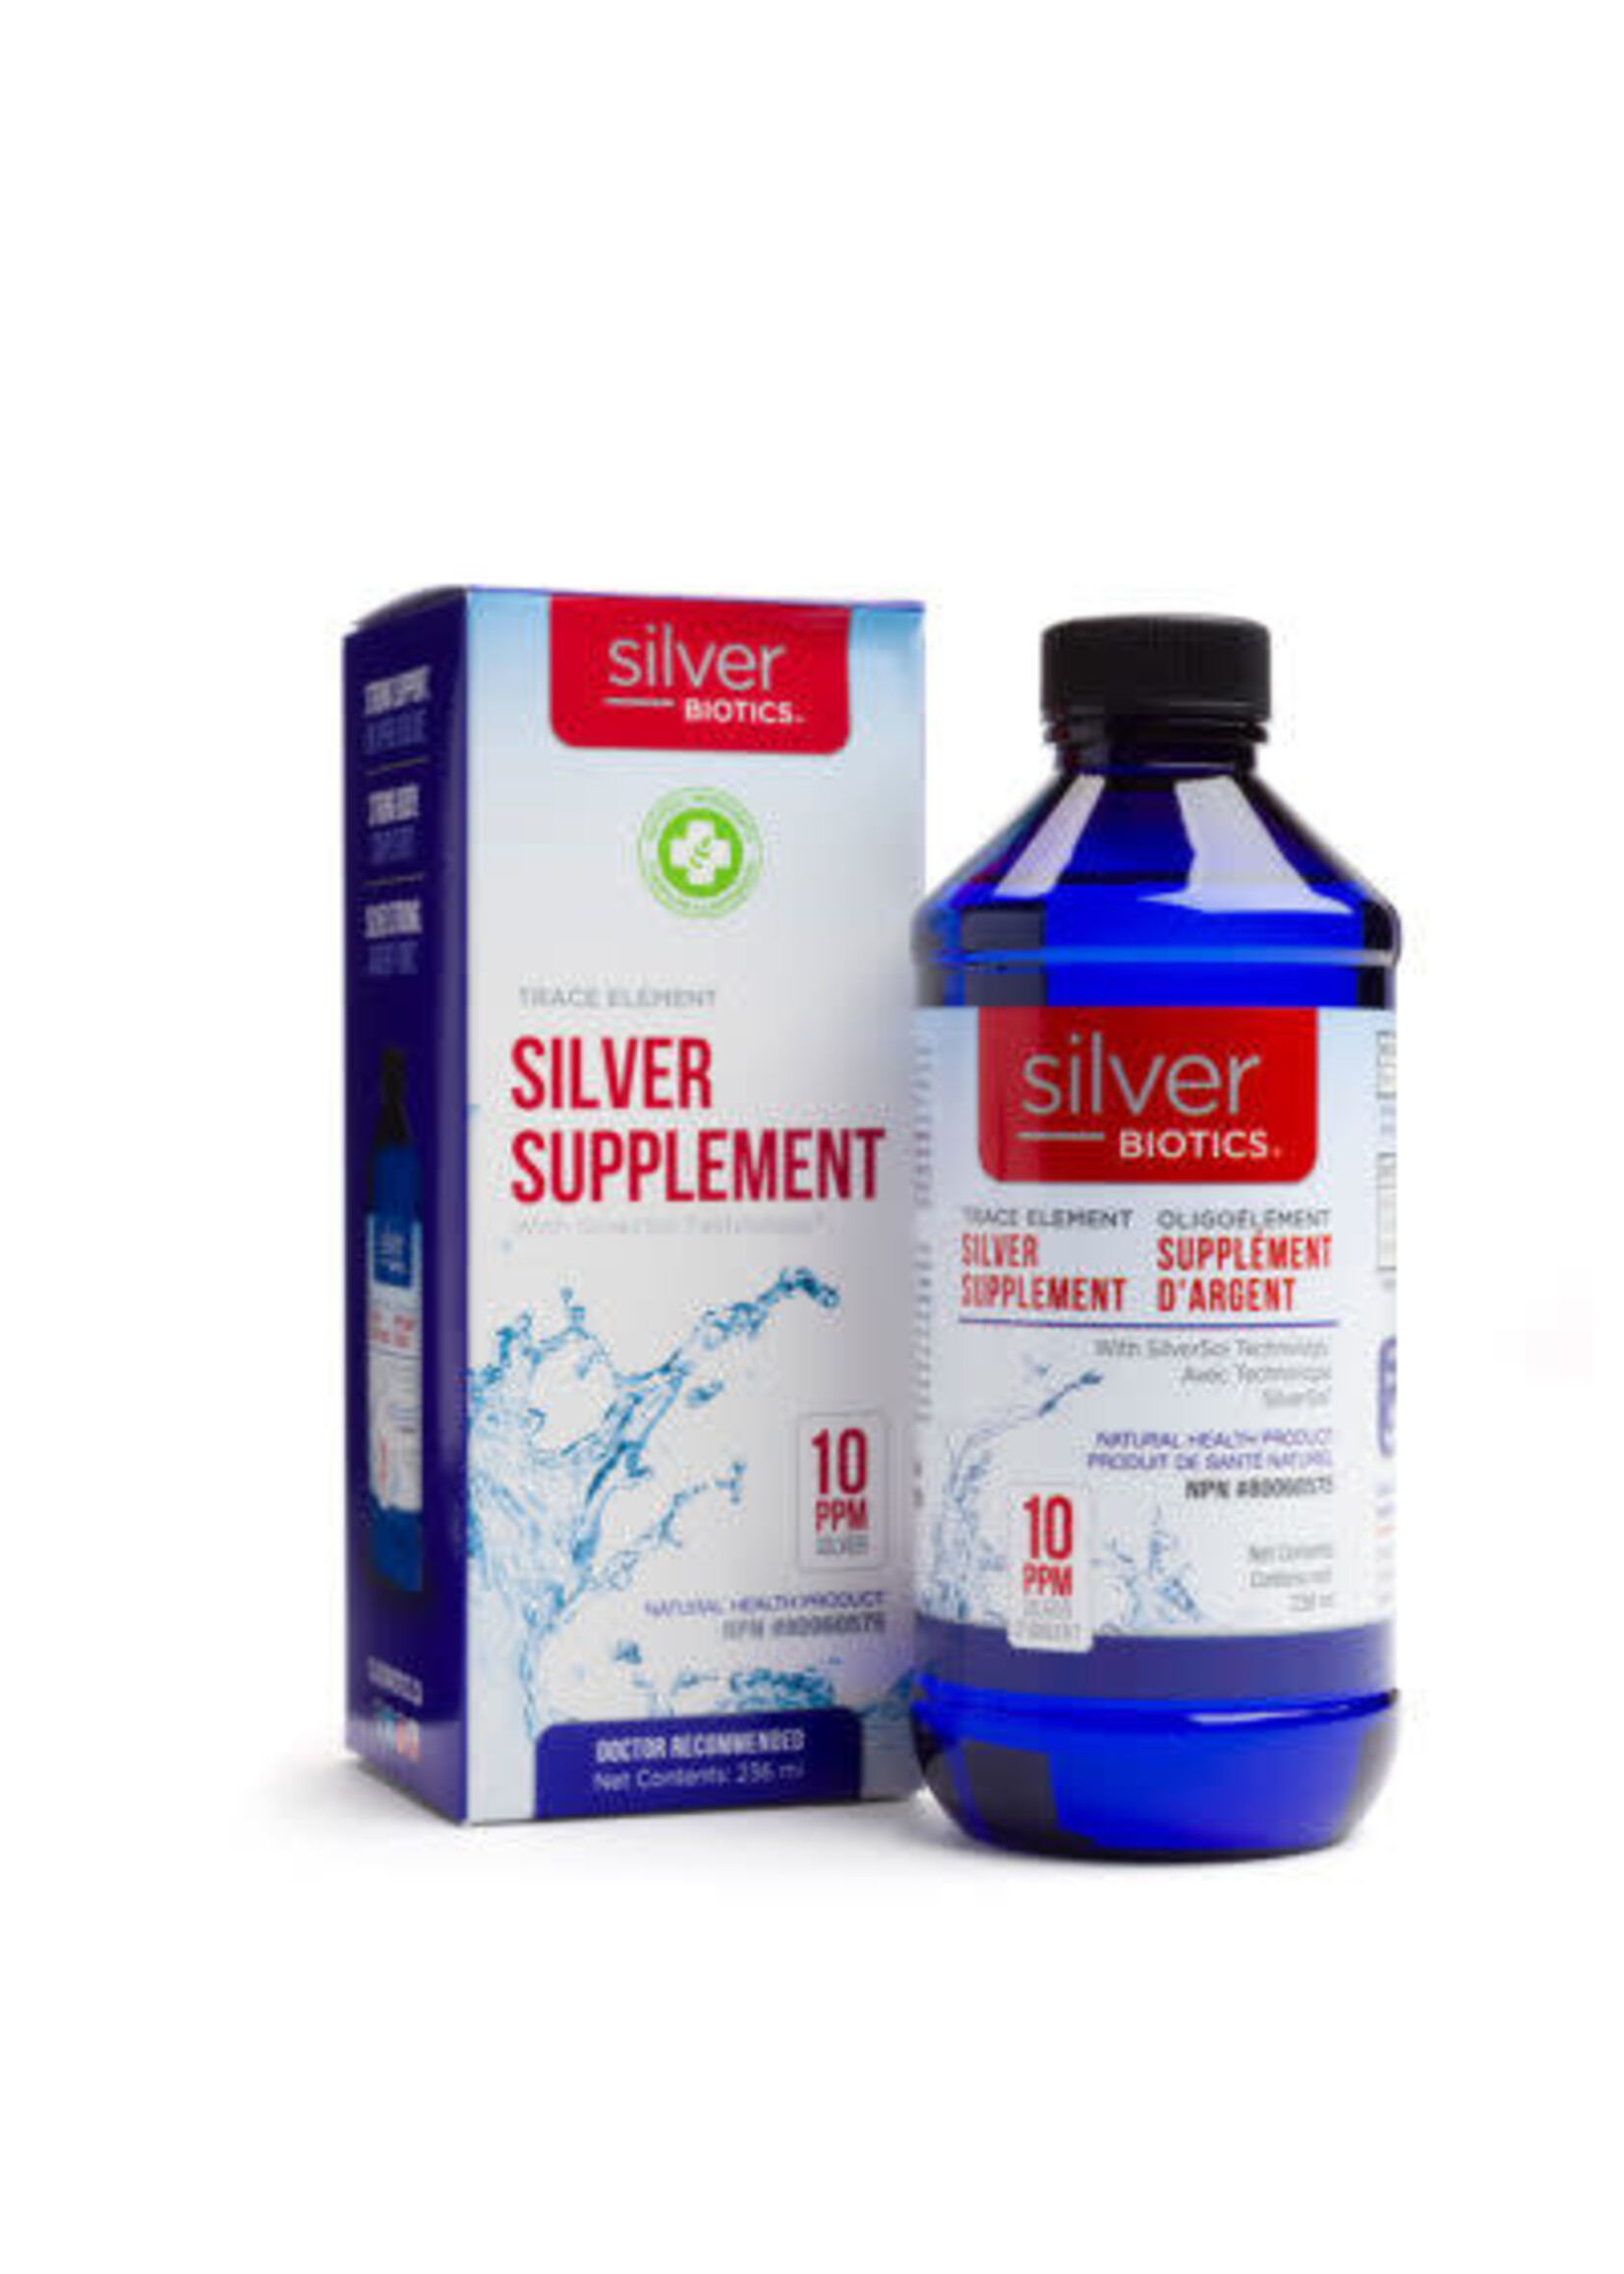 American Biotech Labs Silver Biotics Silver Supplement 10PPM